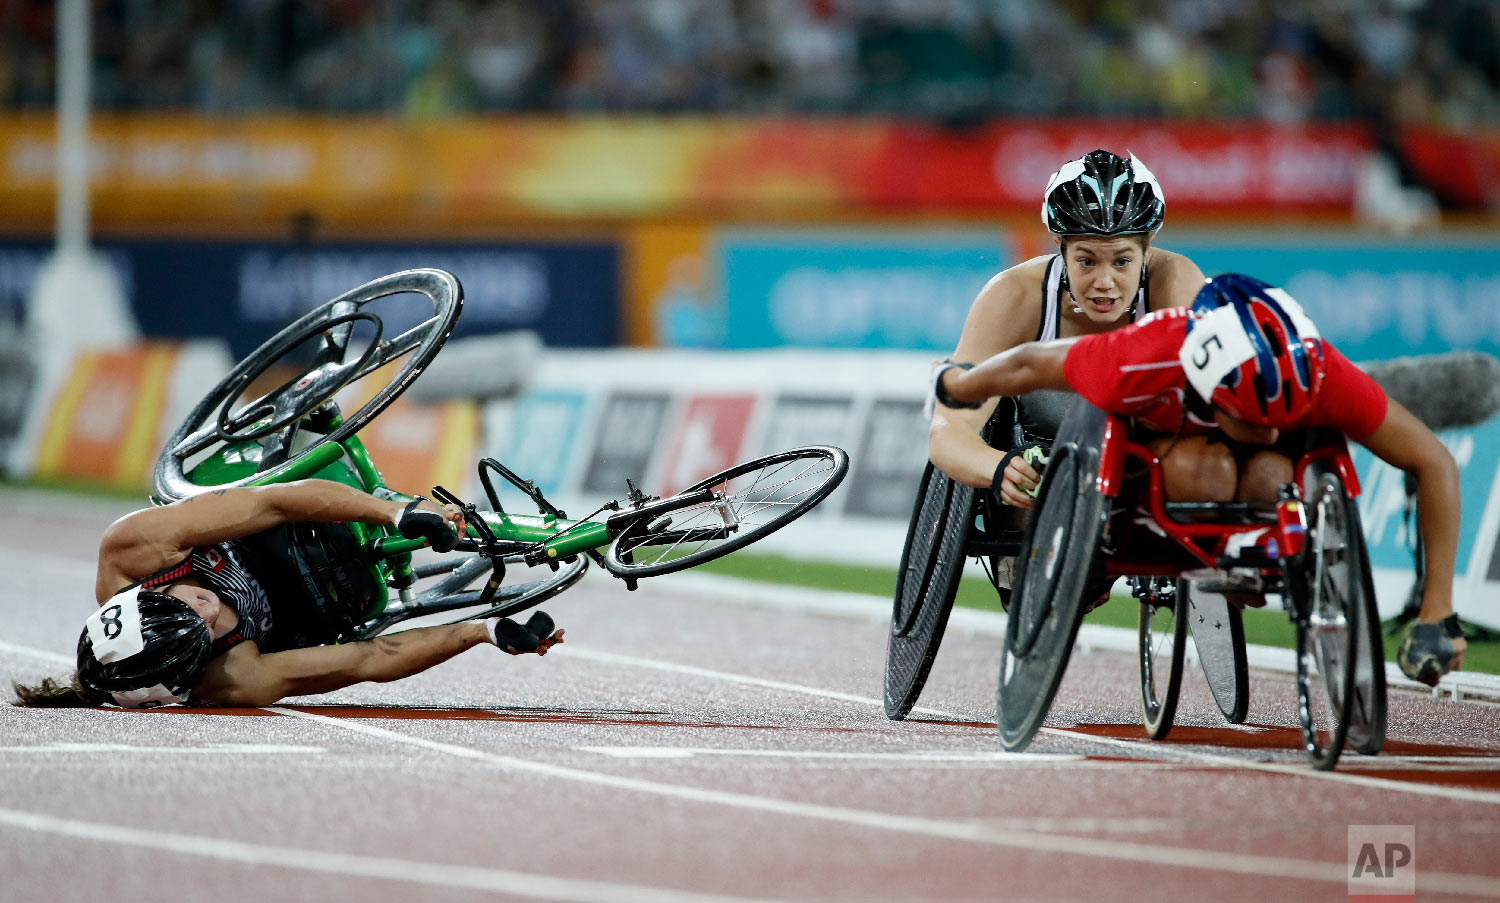  Canada's Jessica Frotten crashes during the women's T54 1500m final at Carrara Stadium during the 2018 Commonwealth Games on the Gold Coast, Australia, Tuesday, April 10, 2018. (AP Photo/Mark Schiefelbein) 